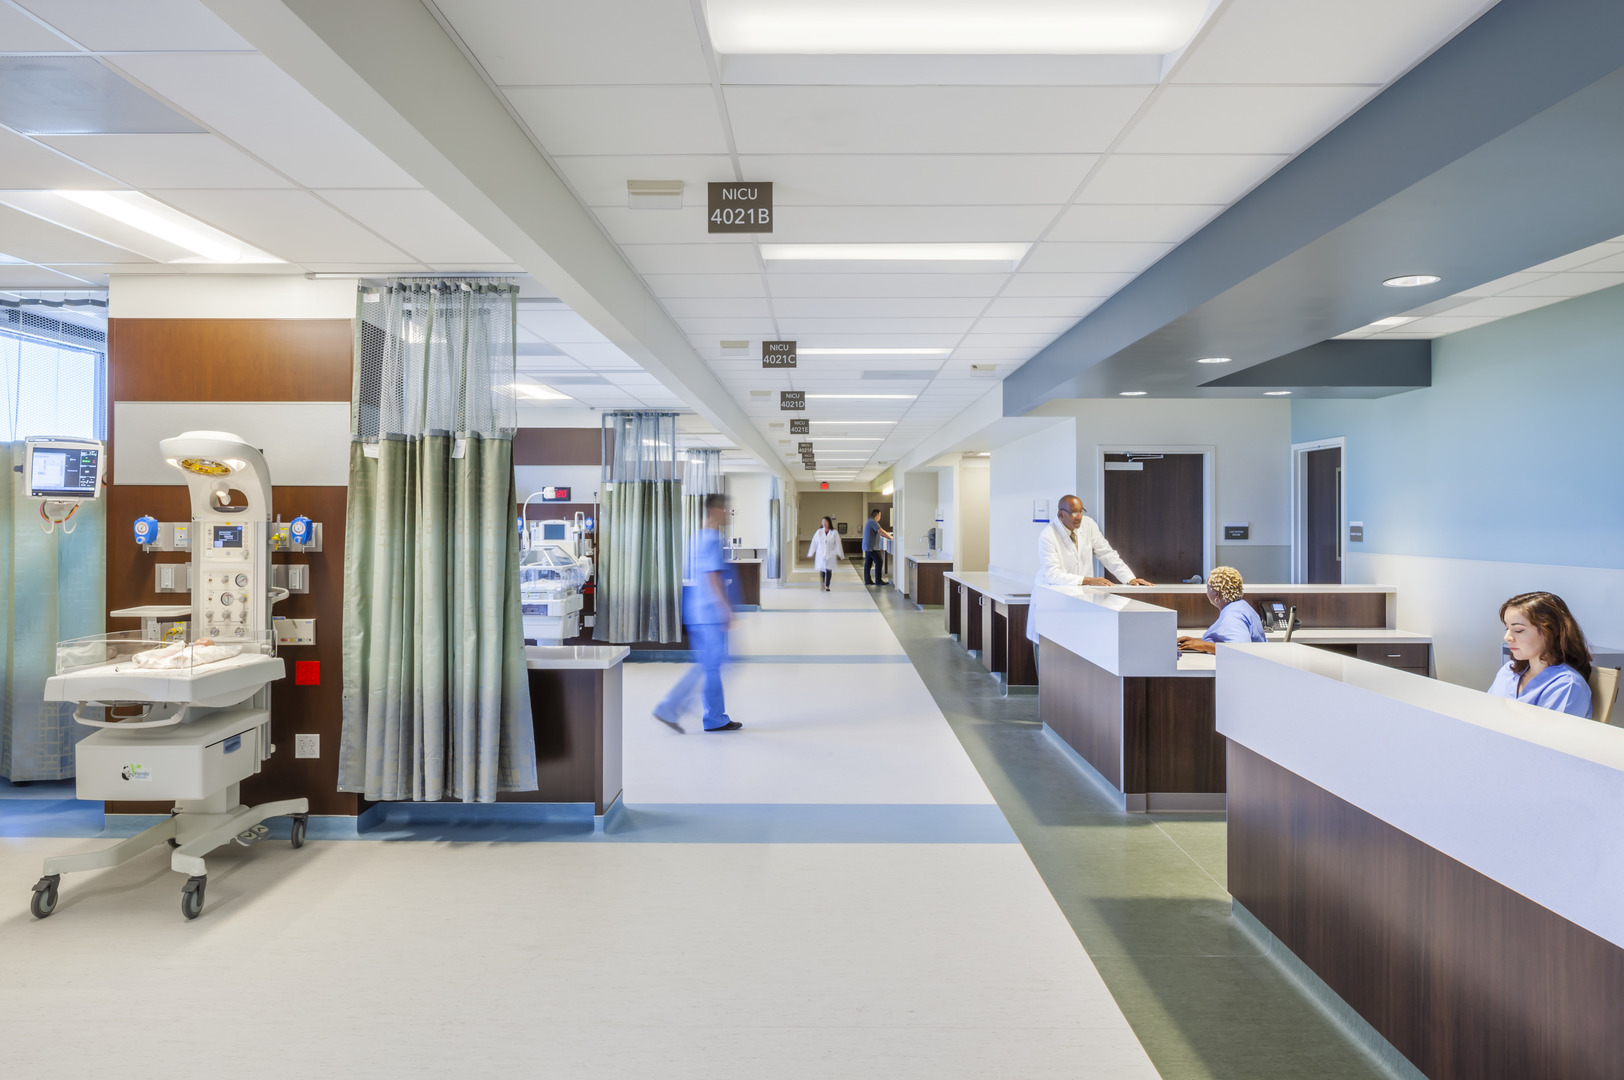 Behavior health problems in the ER can be mitigated through thoughtful room layouts.